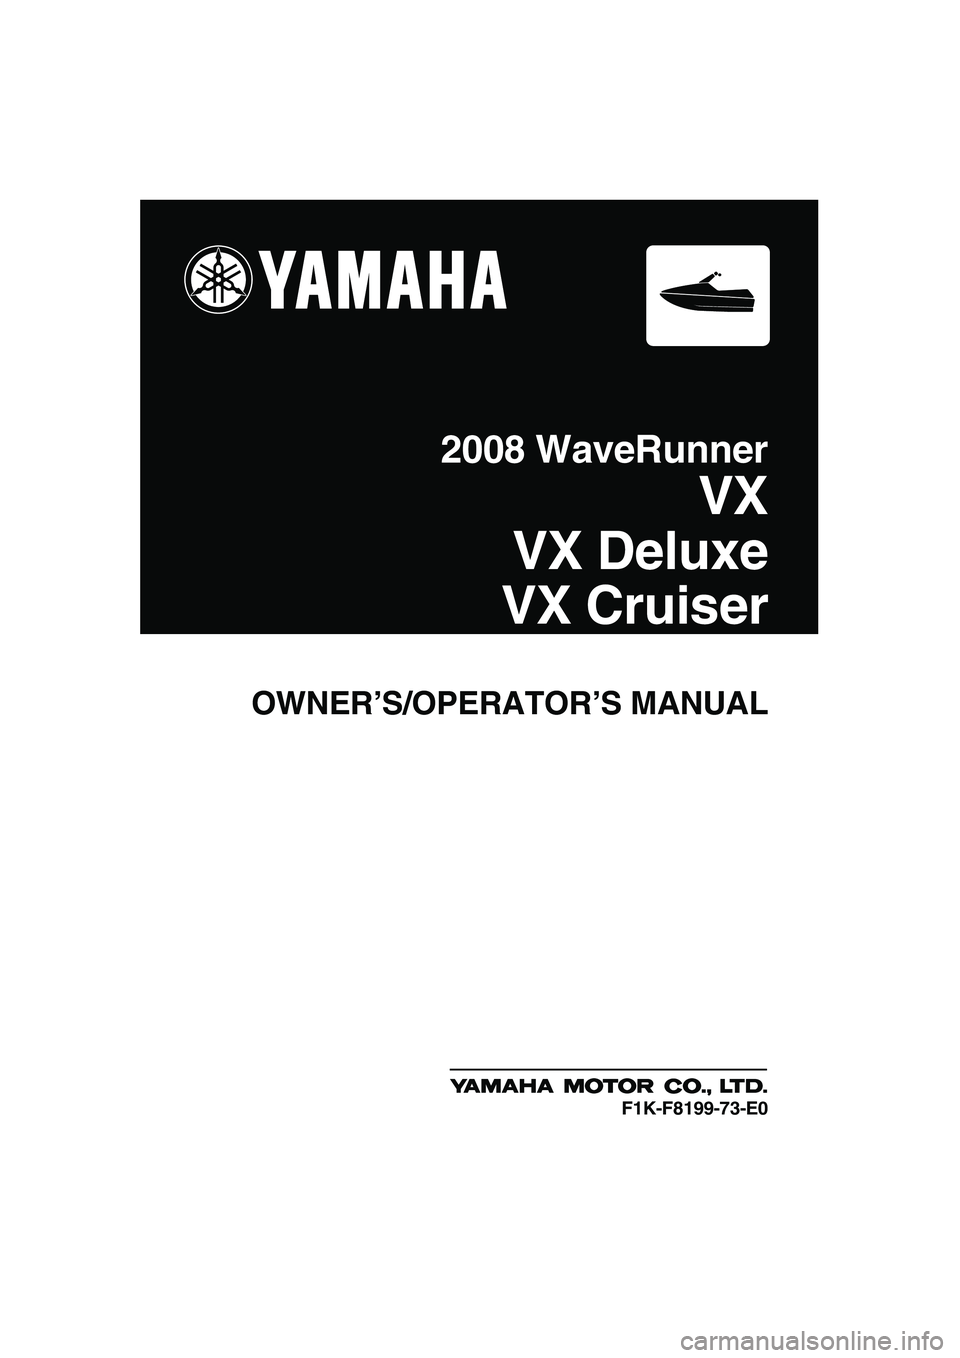 YAMAHA VX 2008  Owners Manual OWNER’S/OPERATOR’S MANUAL
2008 WaveRunner
VX
VX Deluxe
VX Cruiser
F1K-F8199-73-E0
UF1K73E0.book  Page 1  Wednesday, July 11, 2007  9:15 AM 